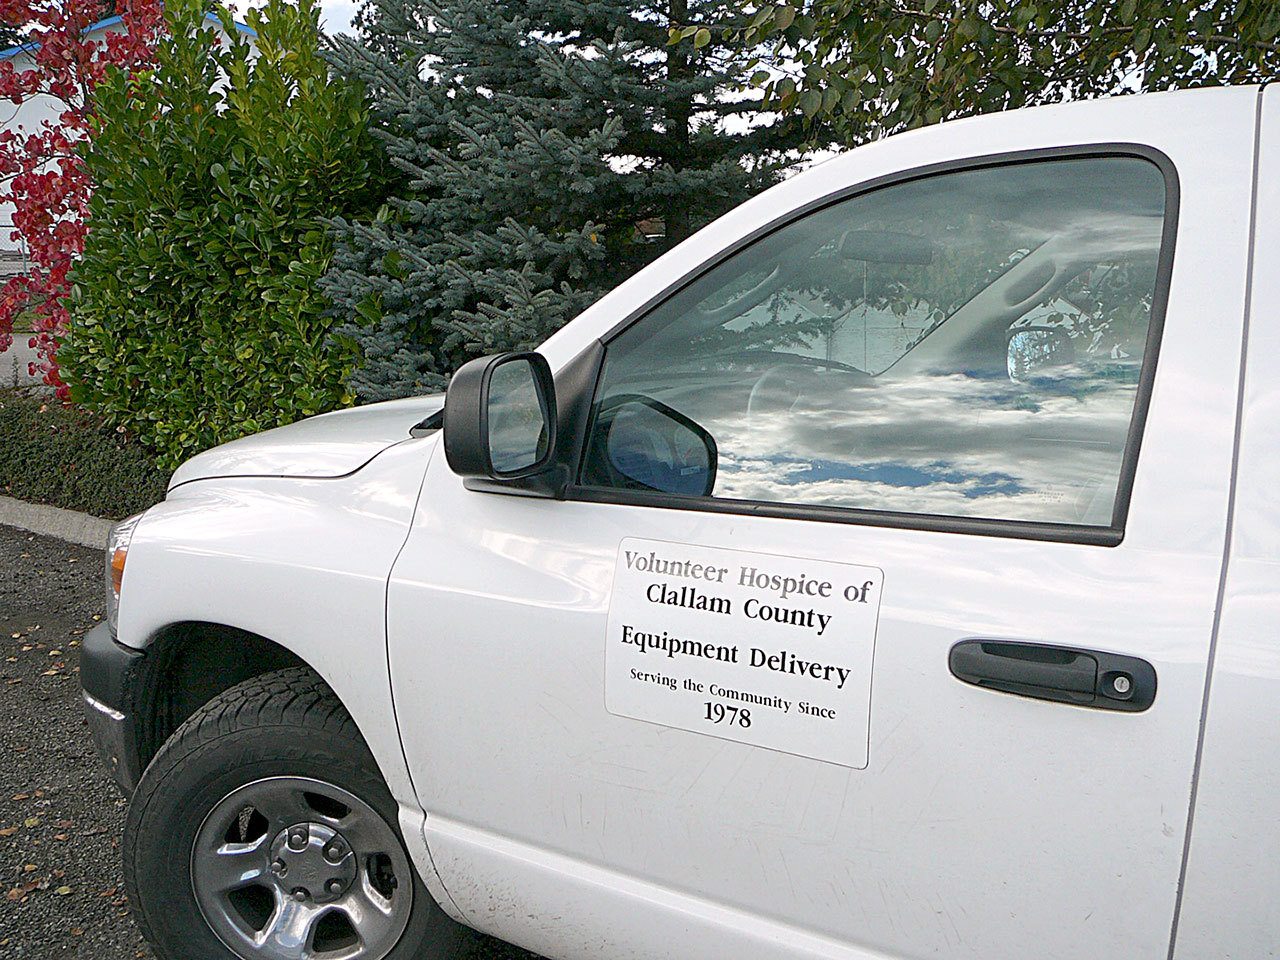 Volunteer Hospice of Clallam County seeks volunteers to drive delivery vehicles.